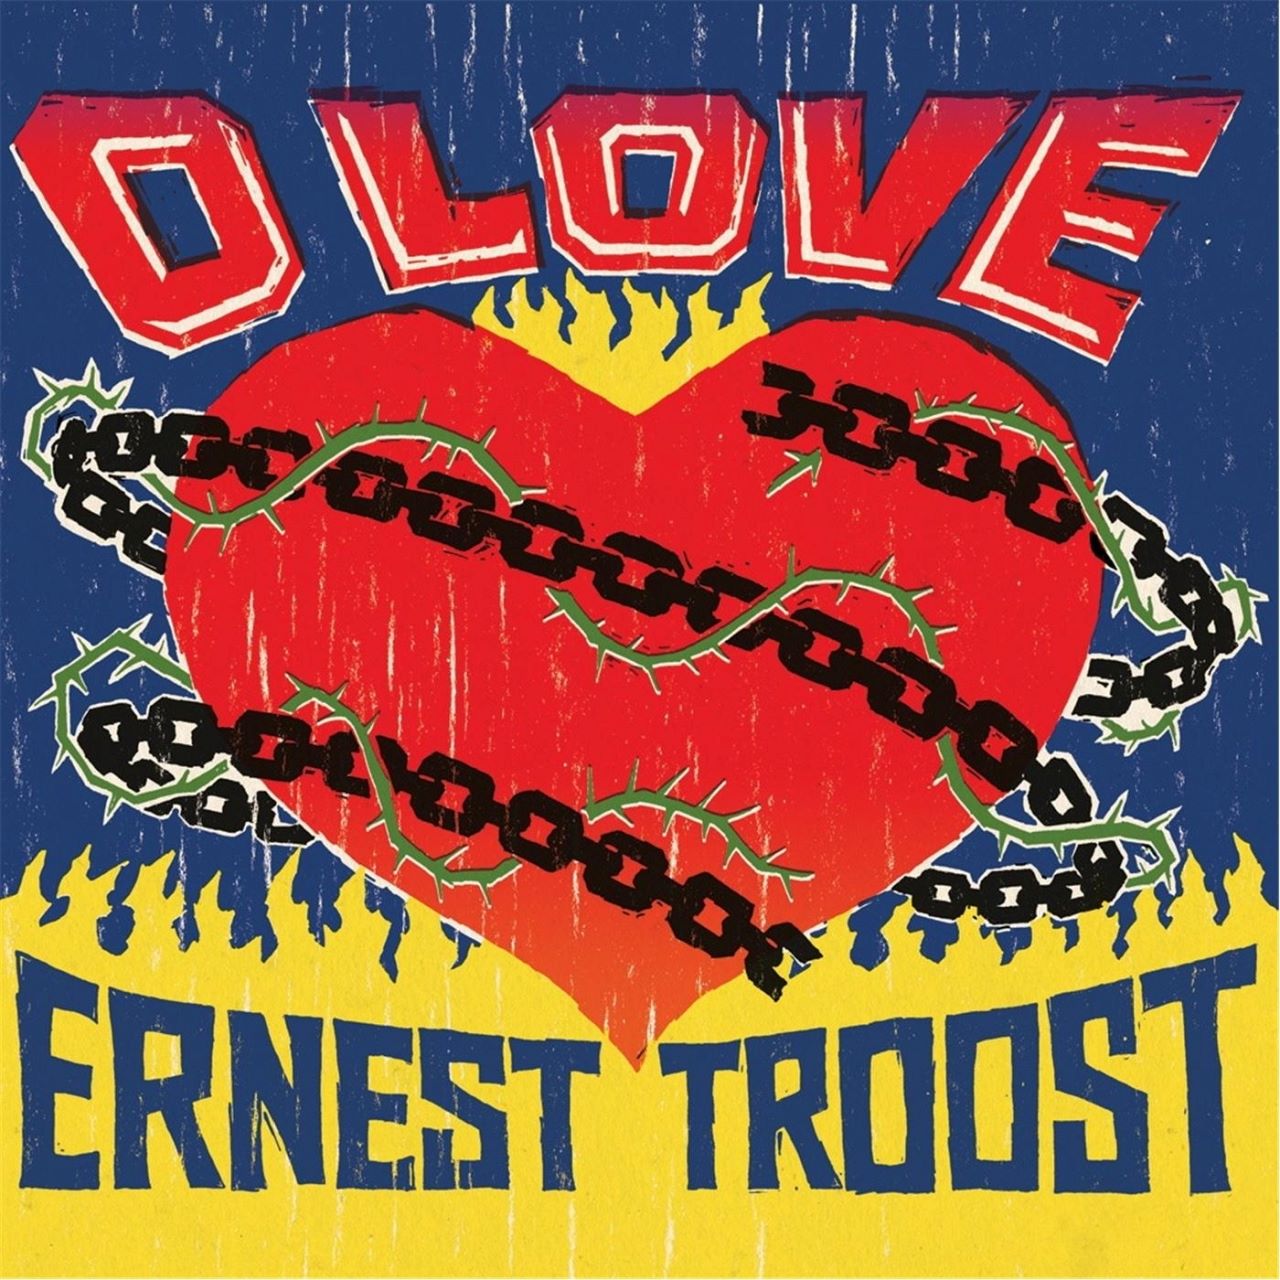 Ernest Troost - O Love cover album